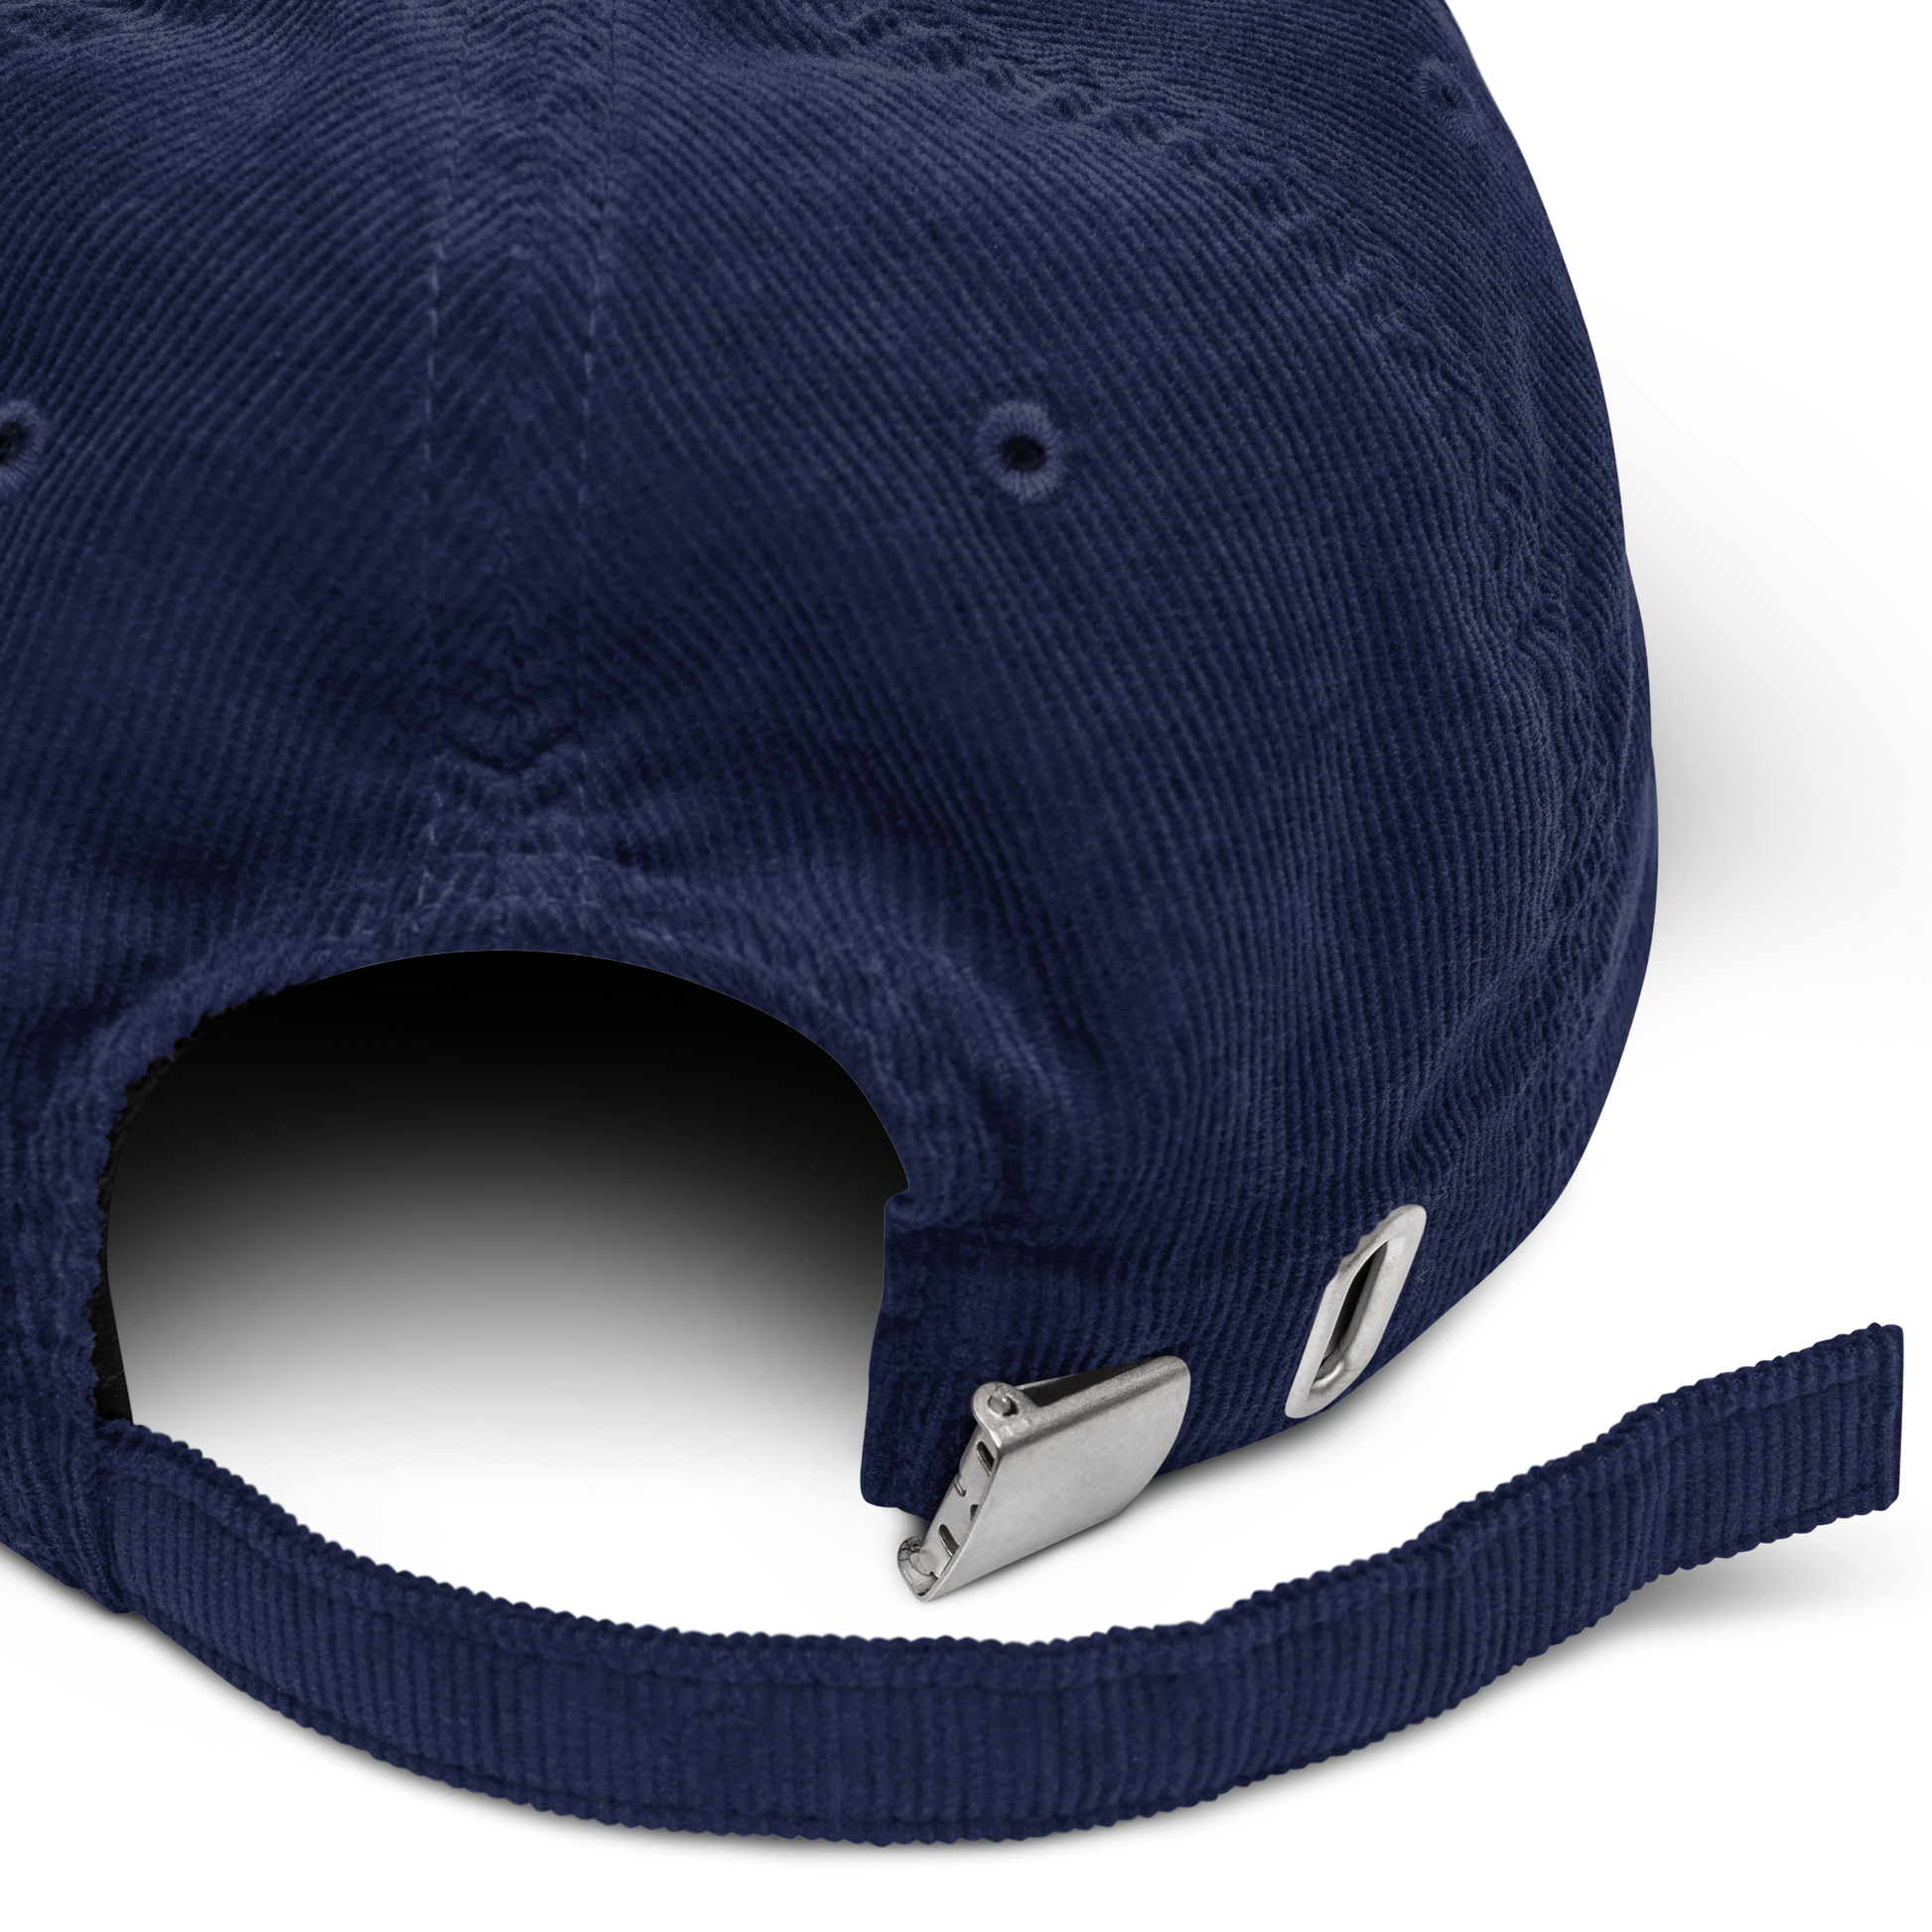 Product details of a Oxford Navy Corduroy Hat featuring an embroidered Boozy Fox logo on front. Shop Cool Corduroy Hats & Corduroy Caps Online - Boozy Fox